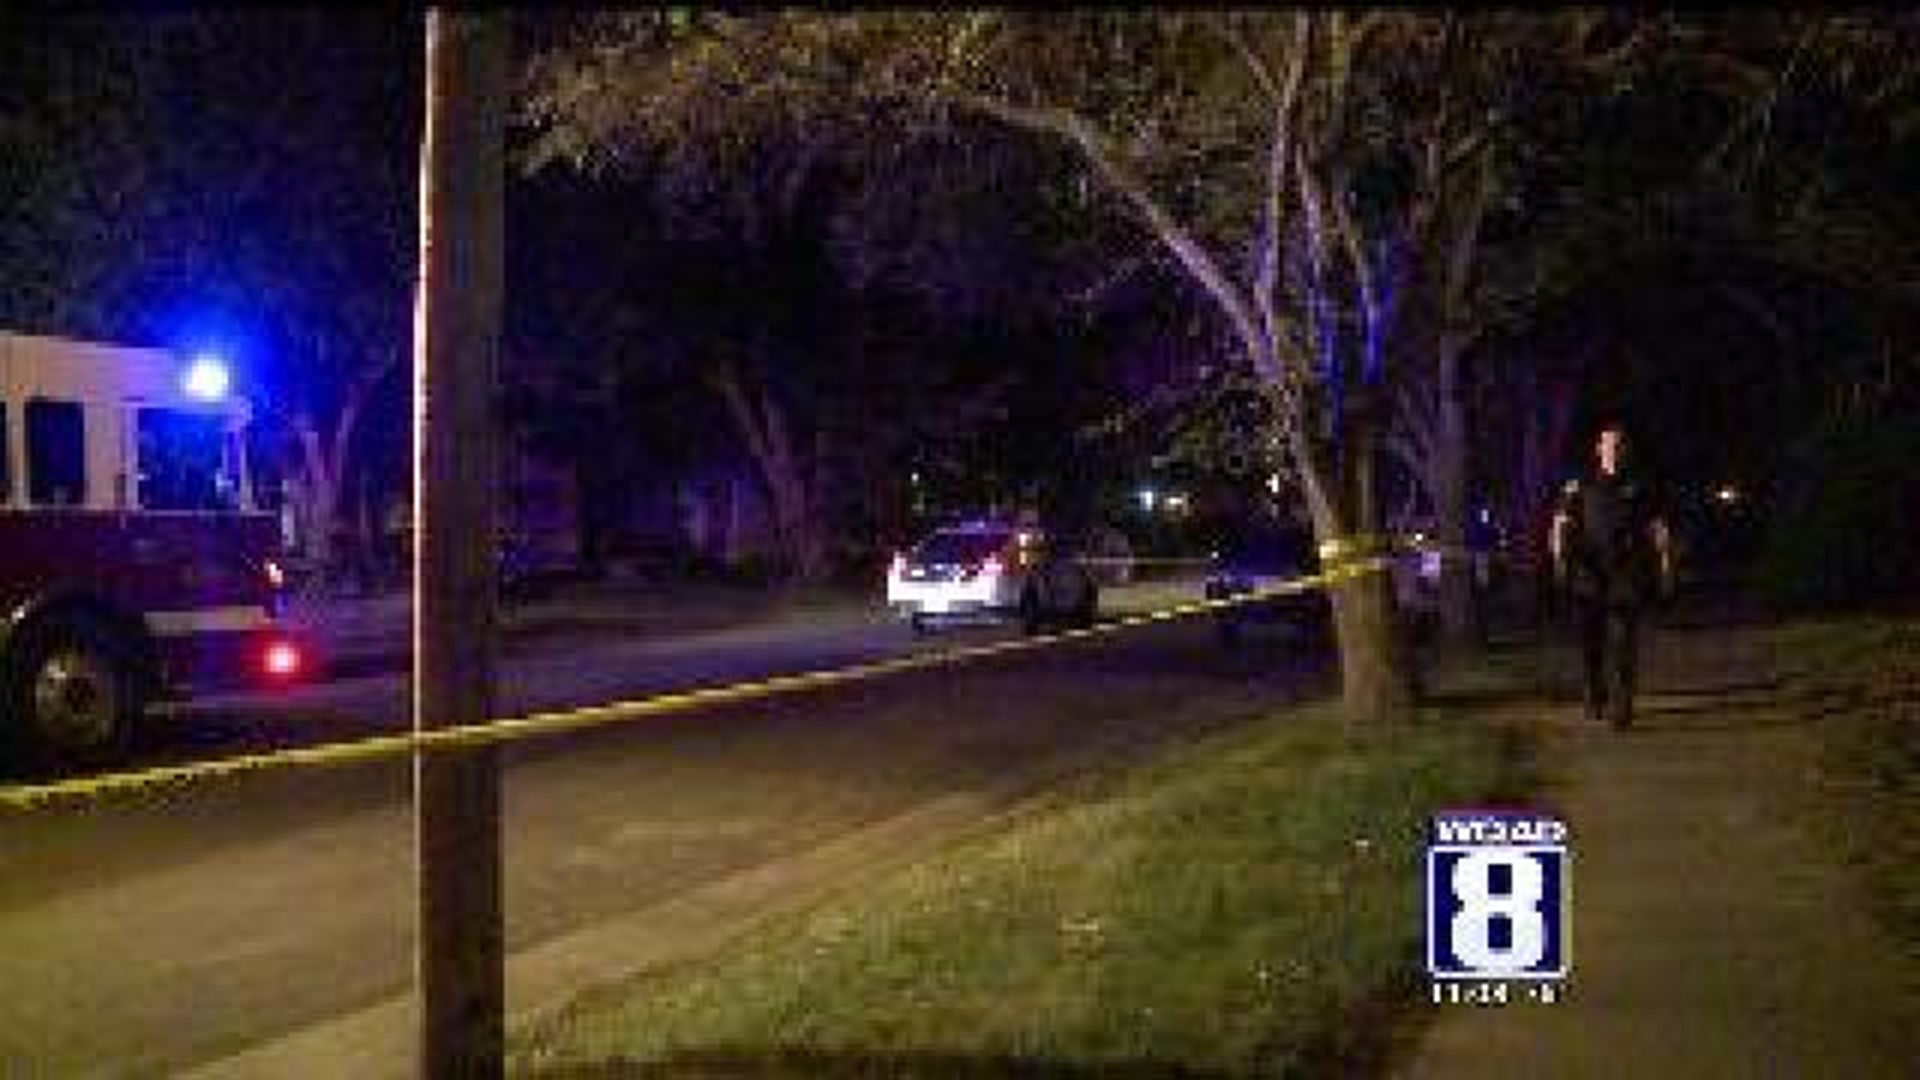 Investigation being conducted after home invasion shooting